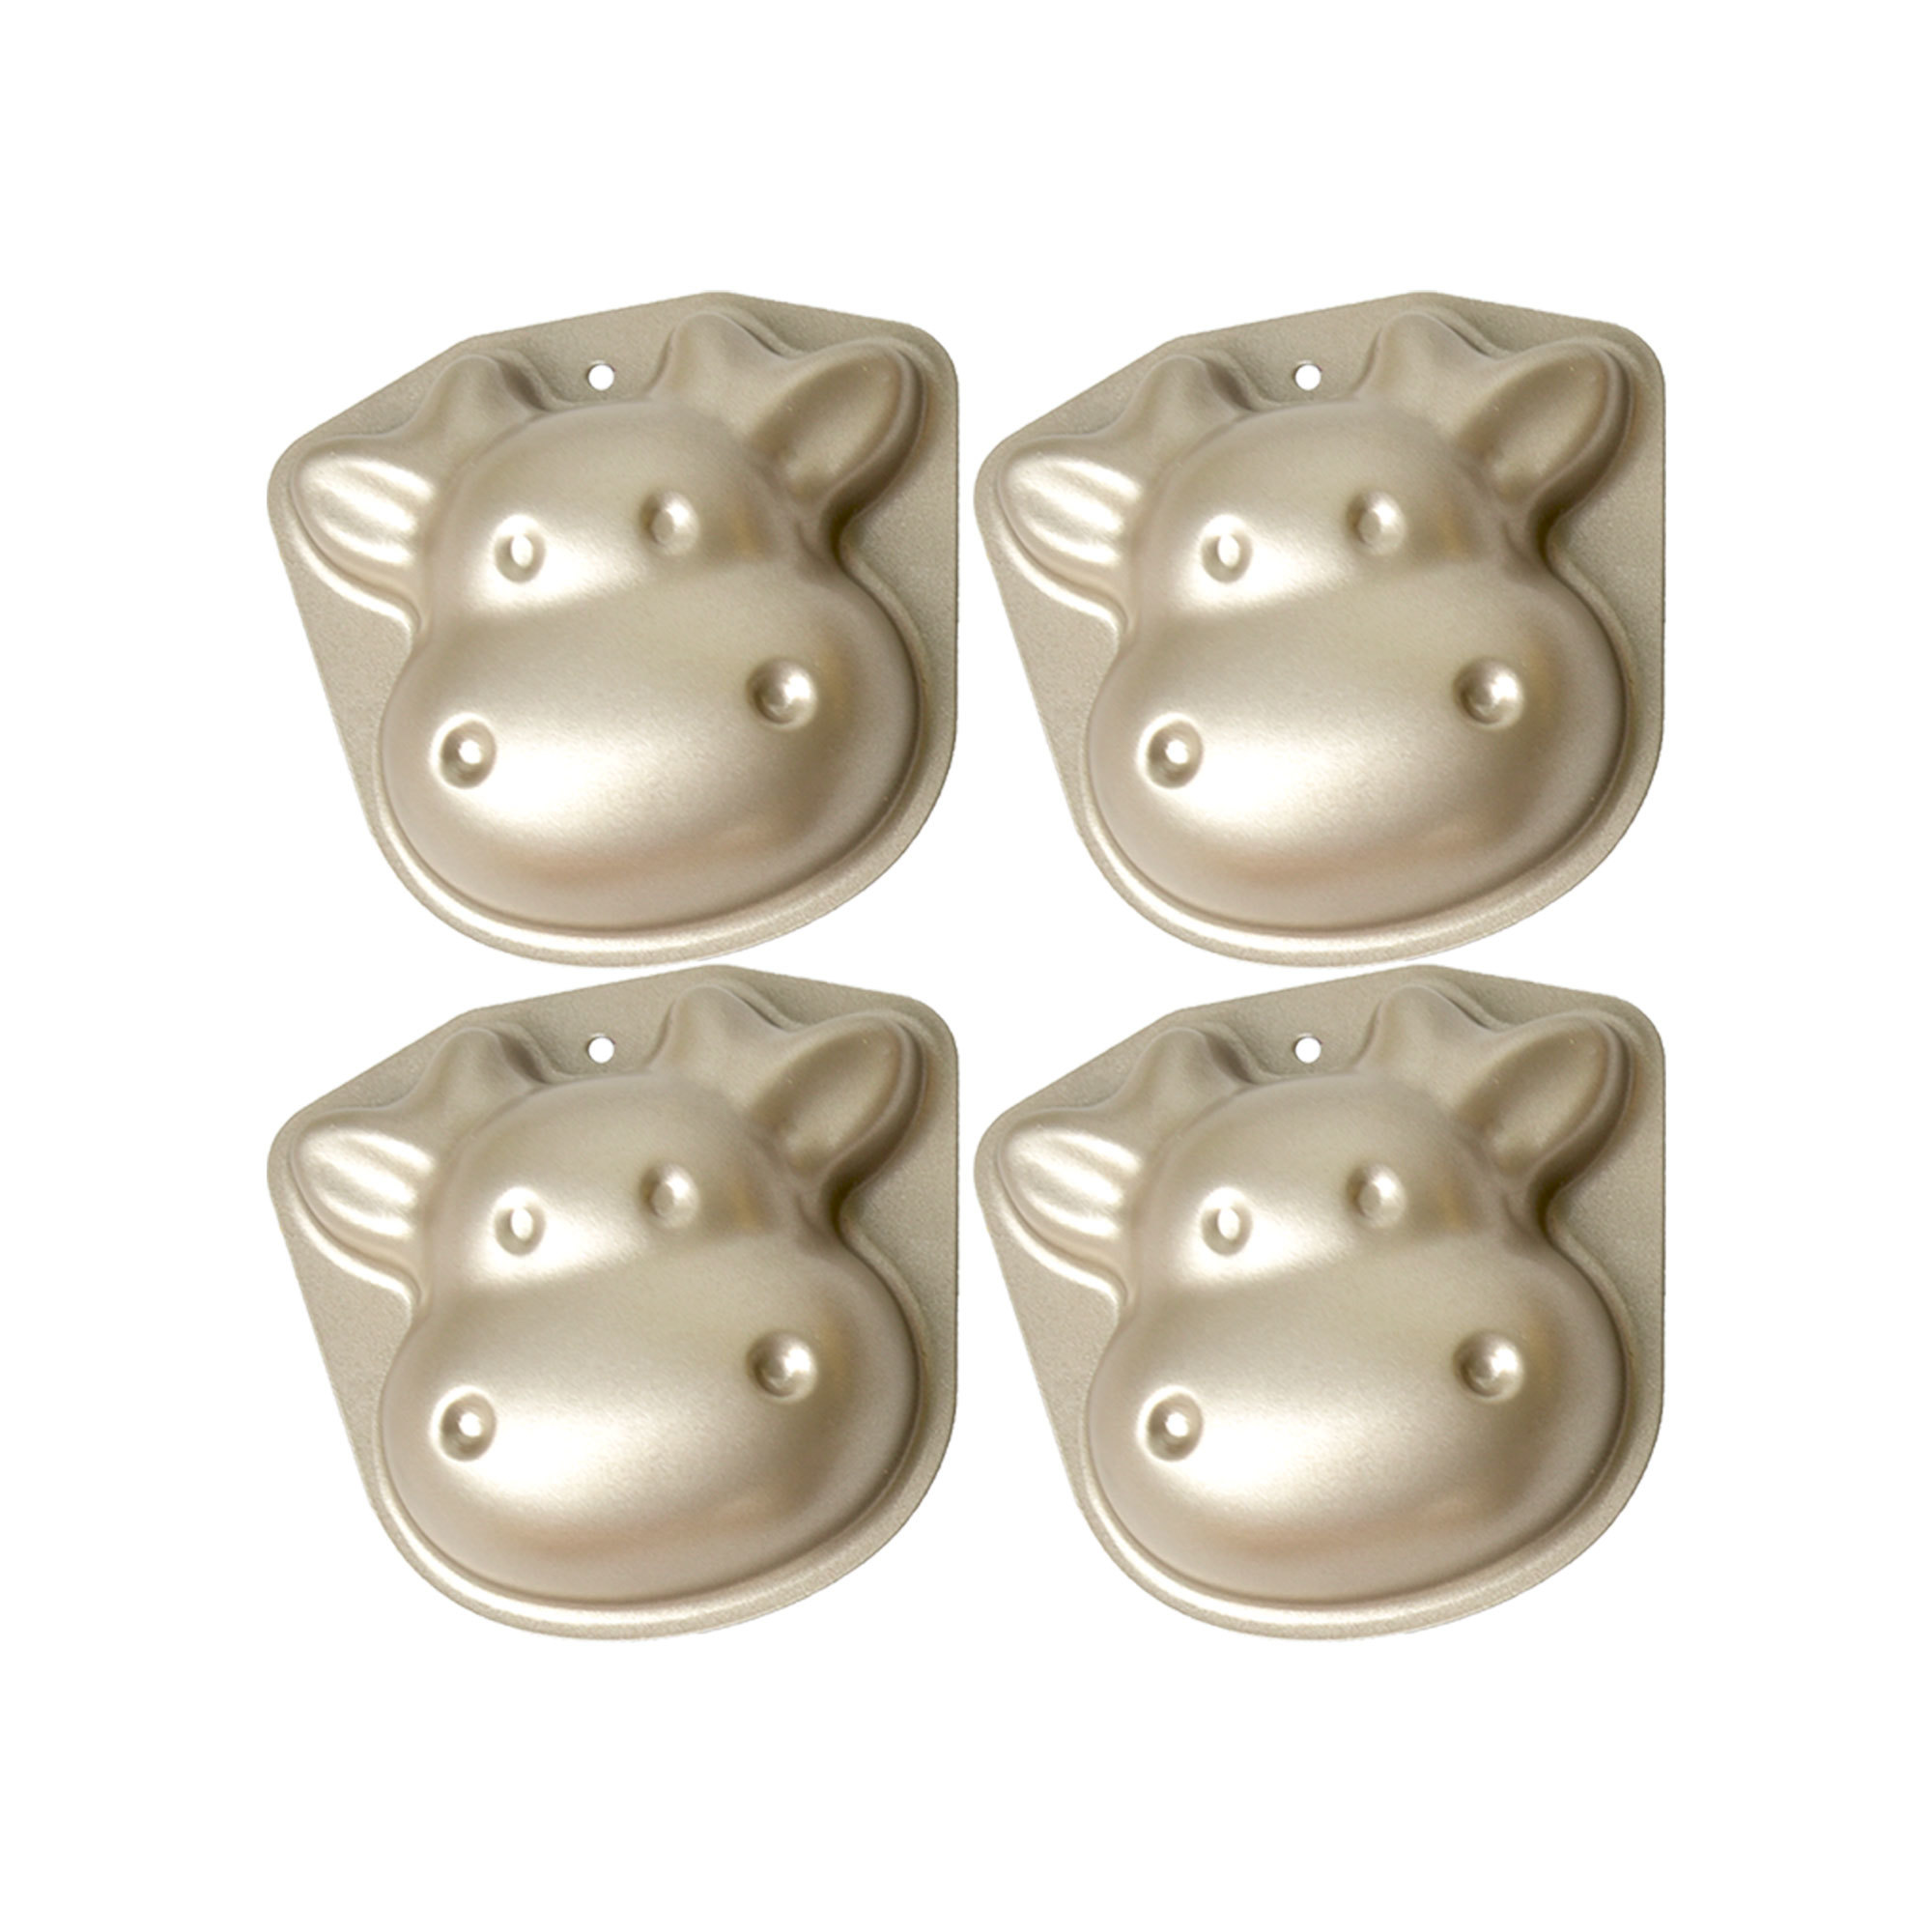 Set of 4 Cow Cake Molds 3633